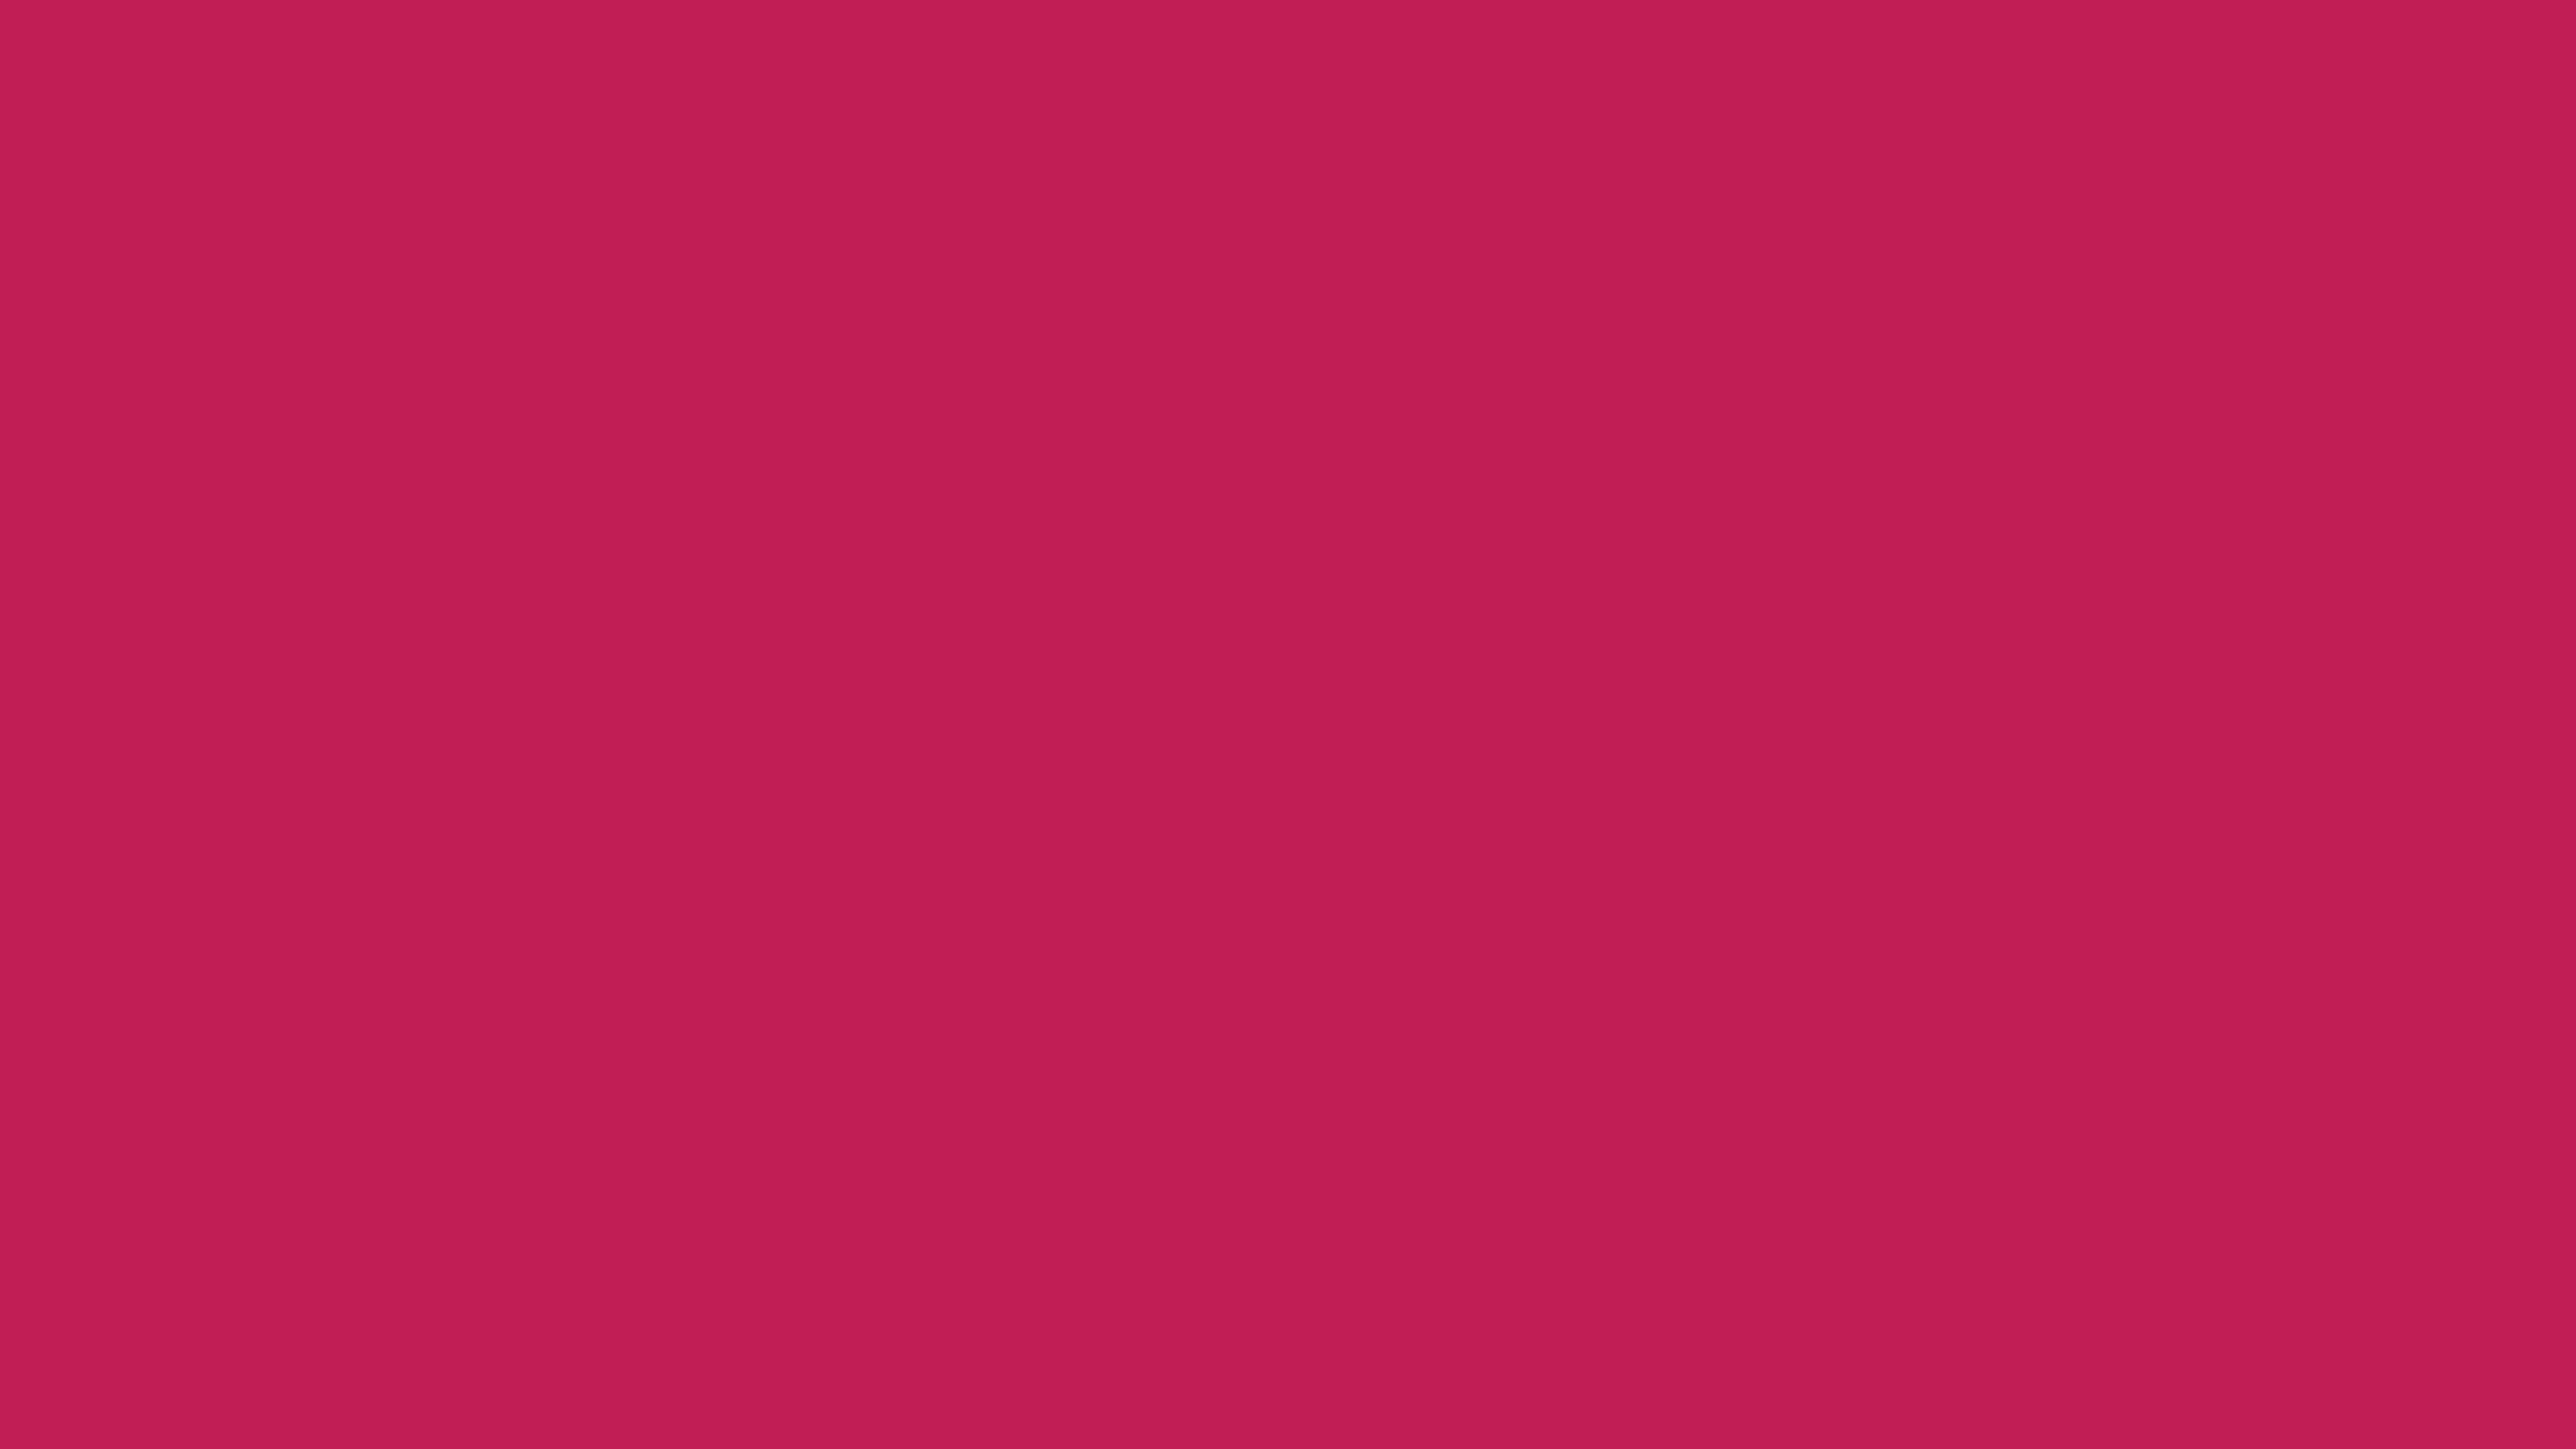 5120x2880 Rose Red Solid Color Background